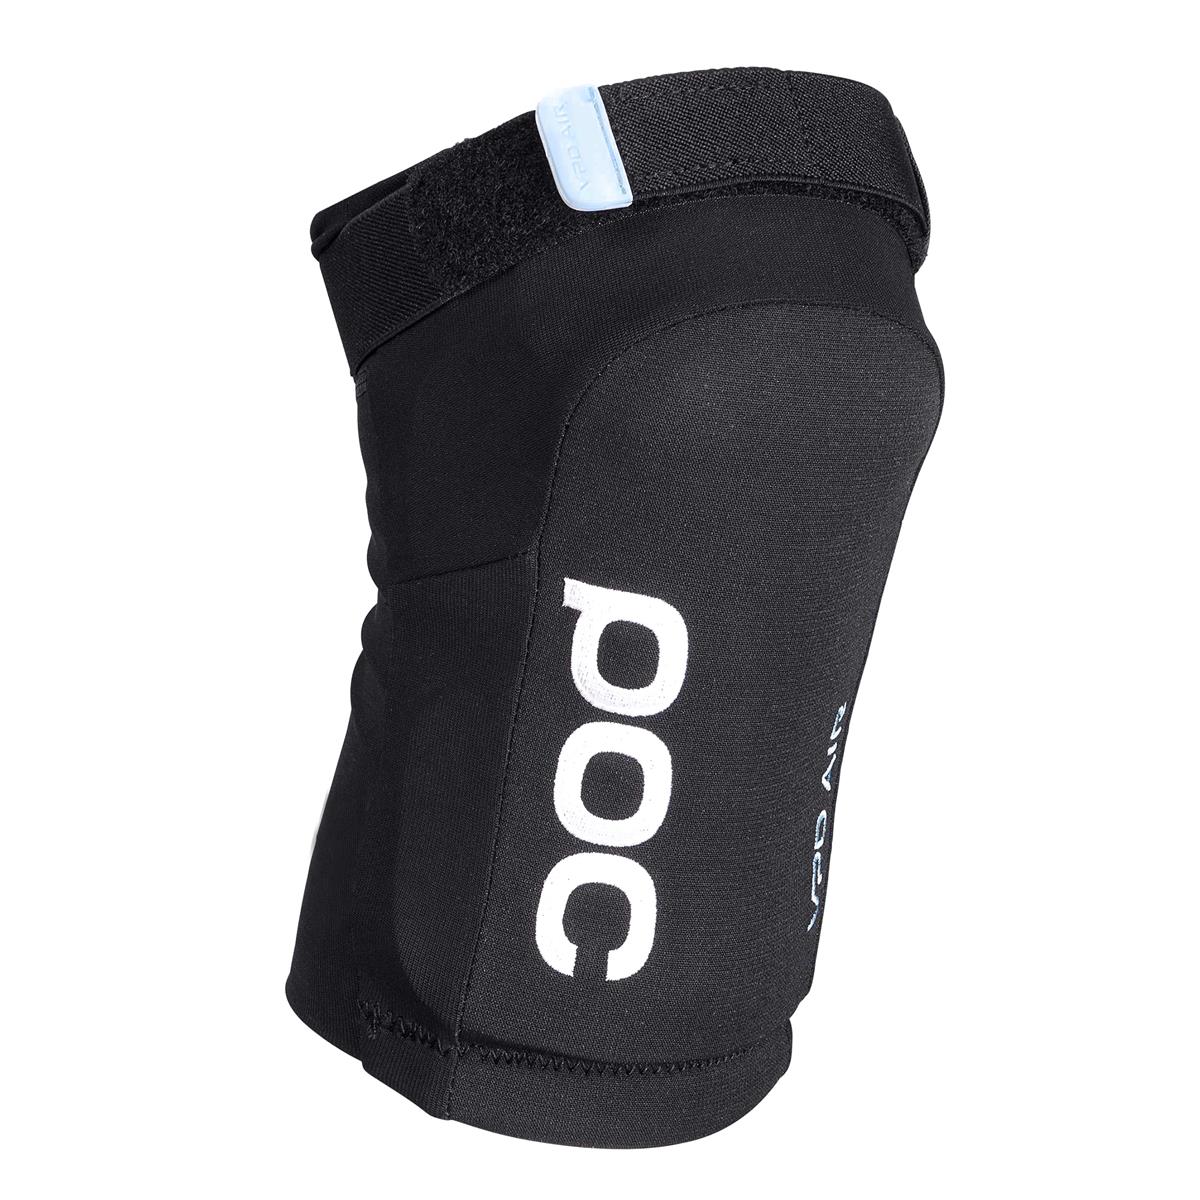 Joint VPD Air Knee pads black Size XL